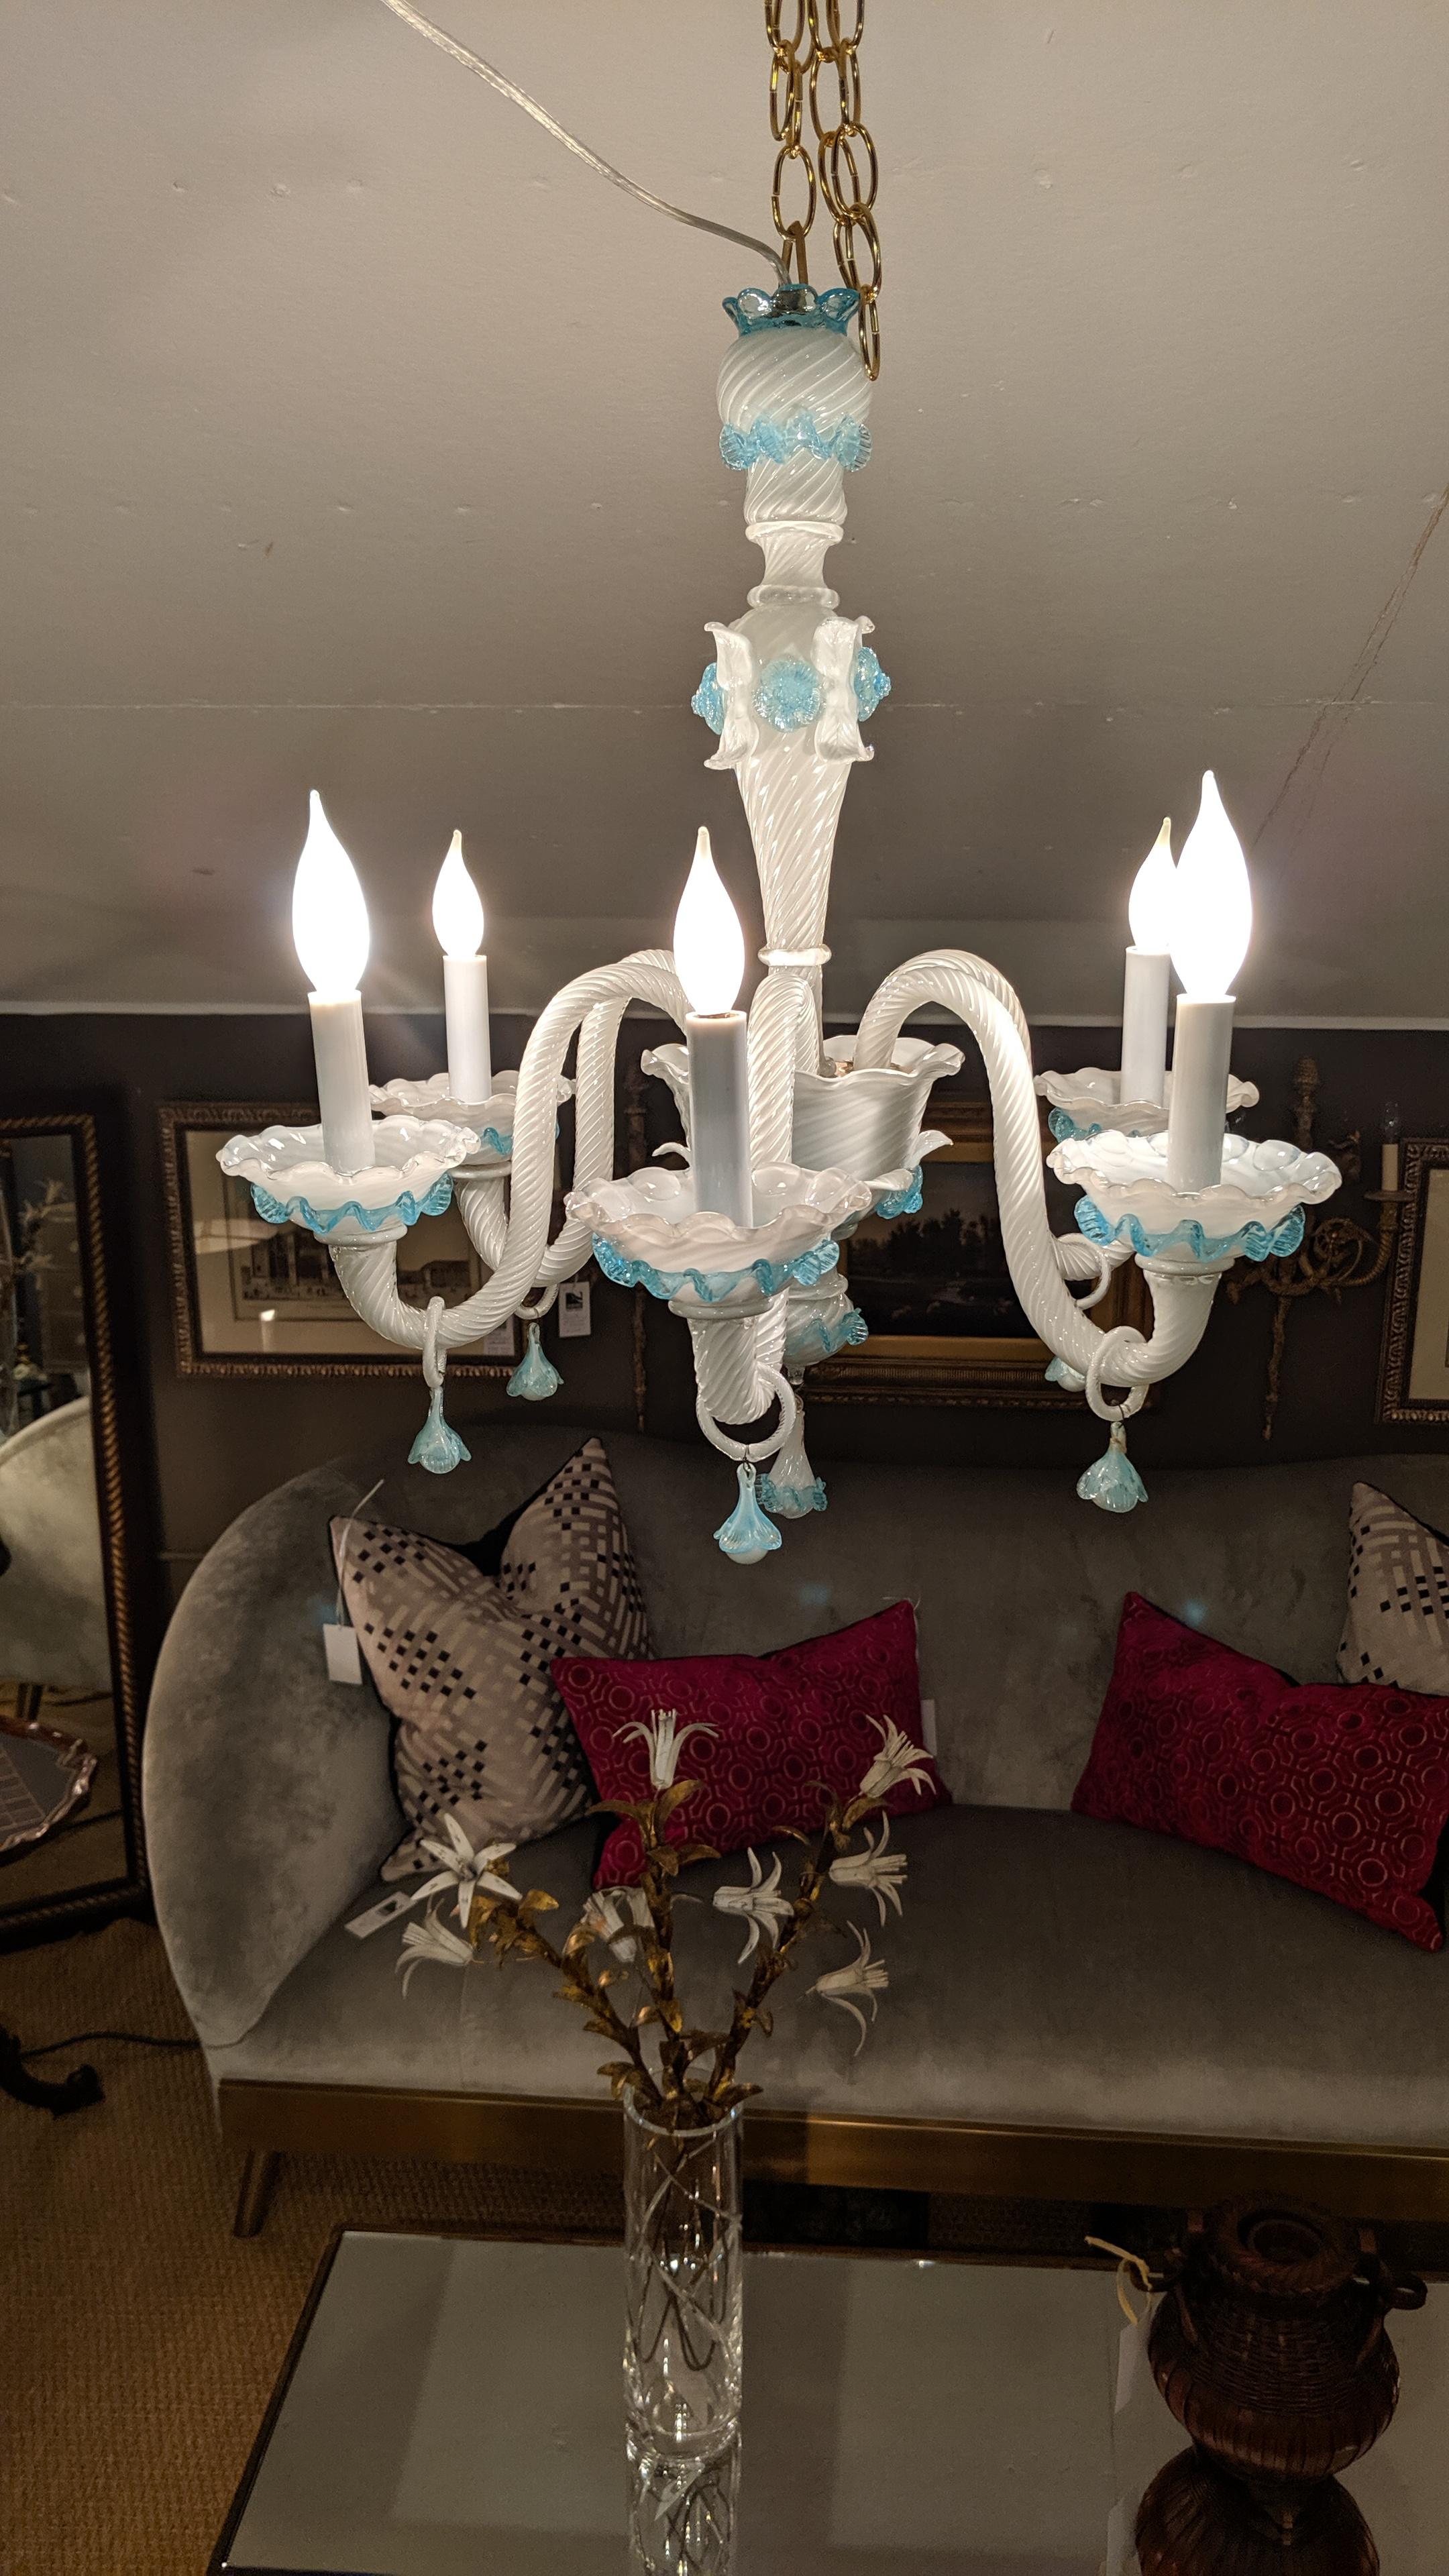 Murano chandelier with white cased glass and aqua adornments. The white glass has a twisted design with applied flowers and ruffles. Each arm has a ring with flower decoration; each bobeche has a scalloped rim. There is a matching Murano glass